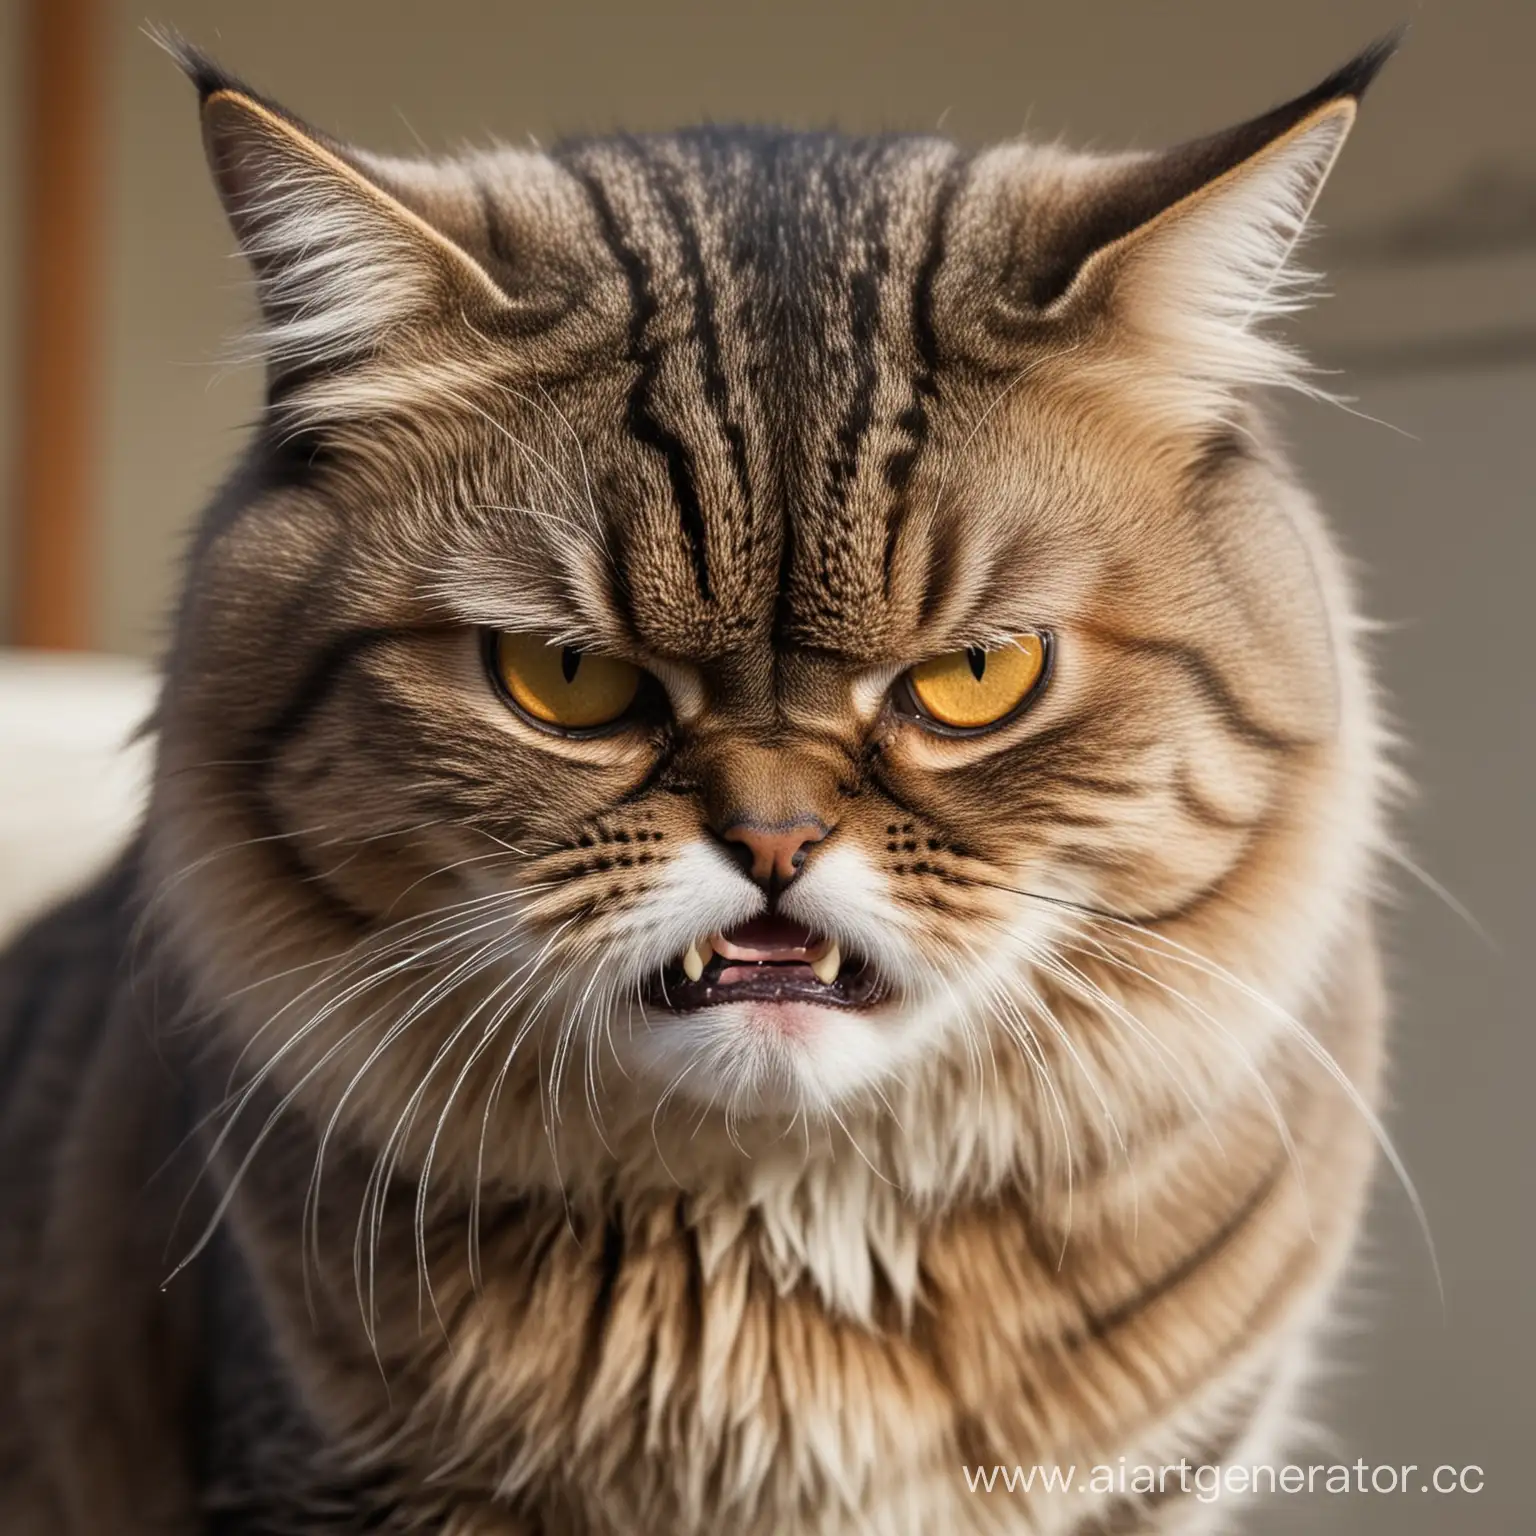 Furious-Feline-with-Intense-Eyes-and-Bristled-Fur